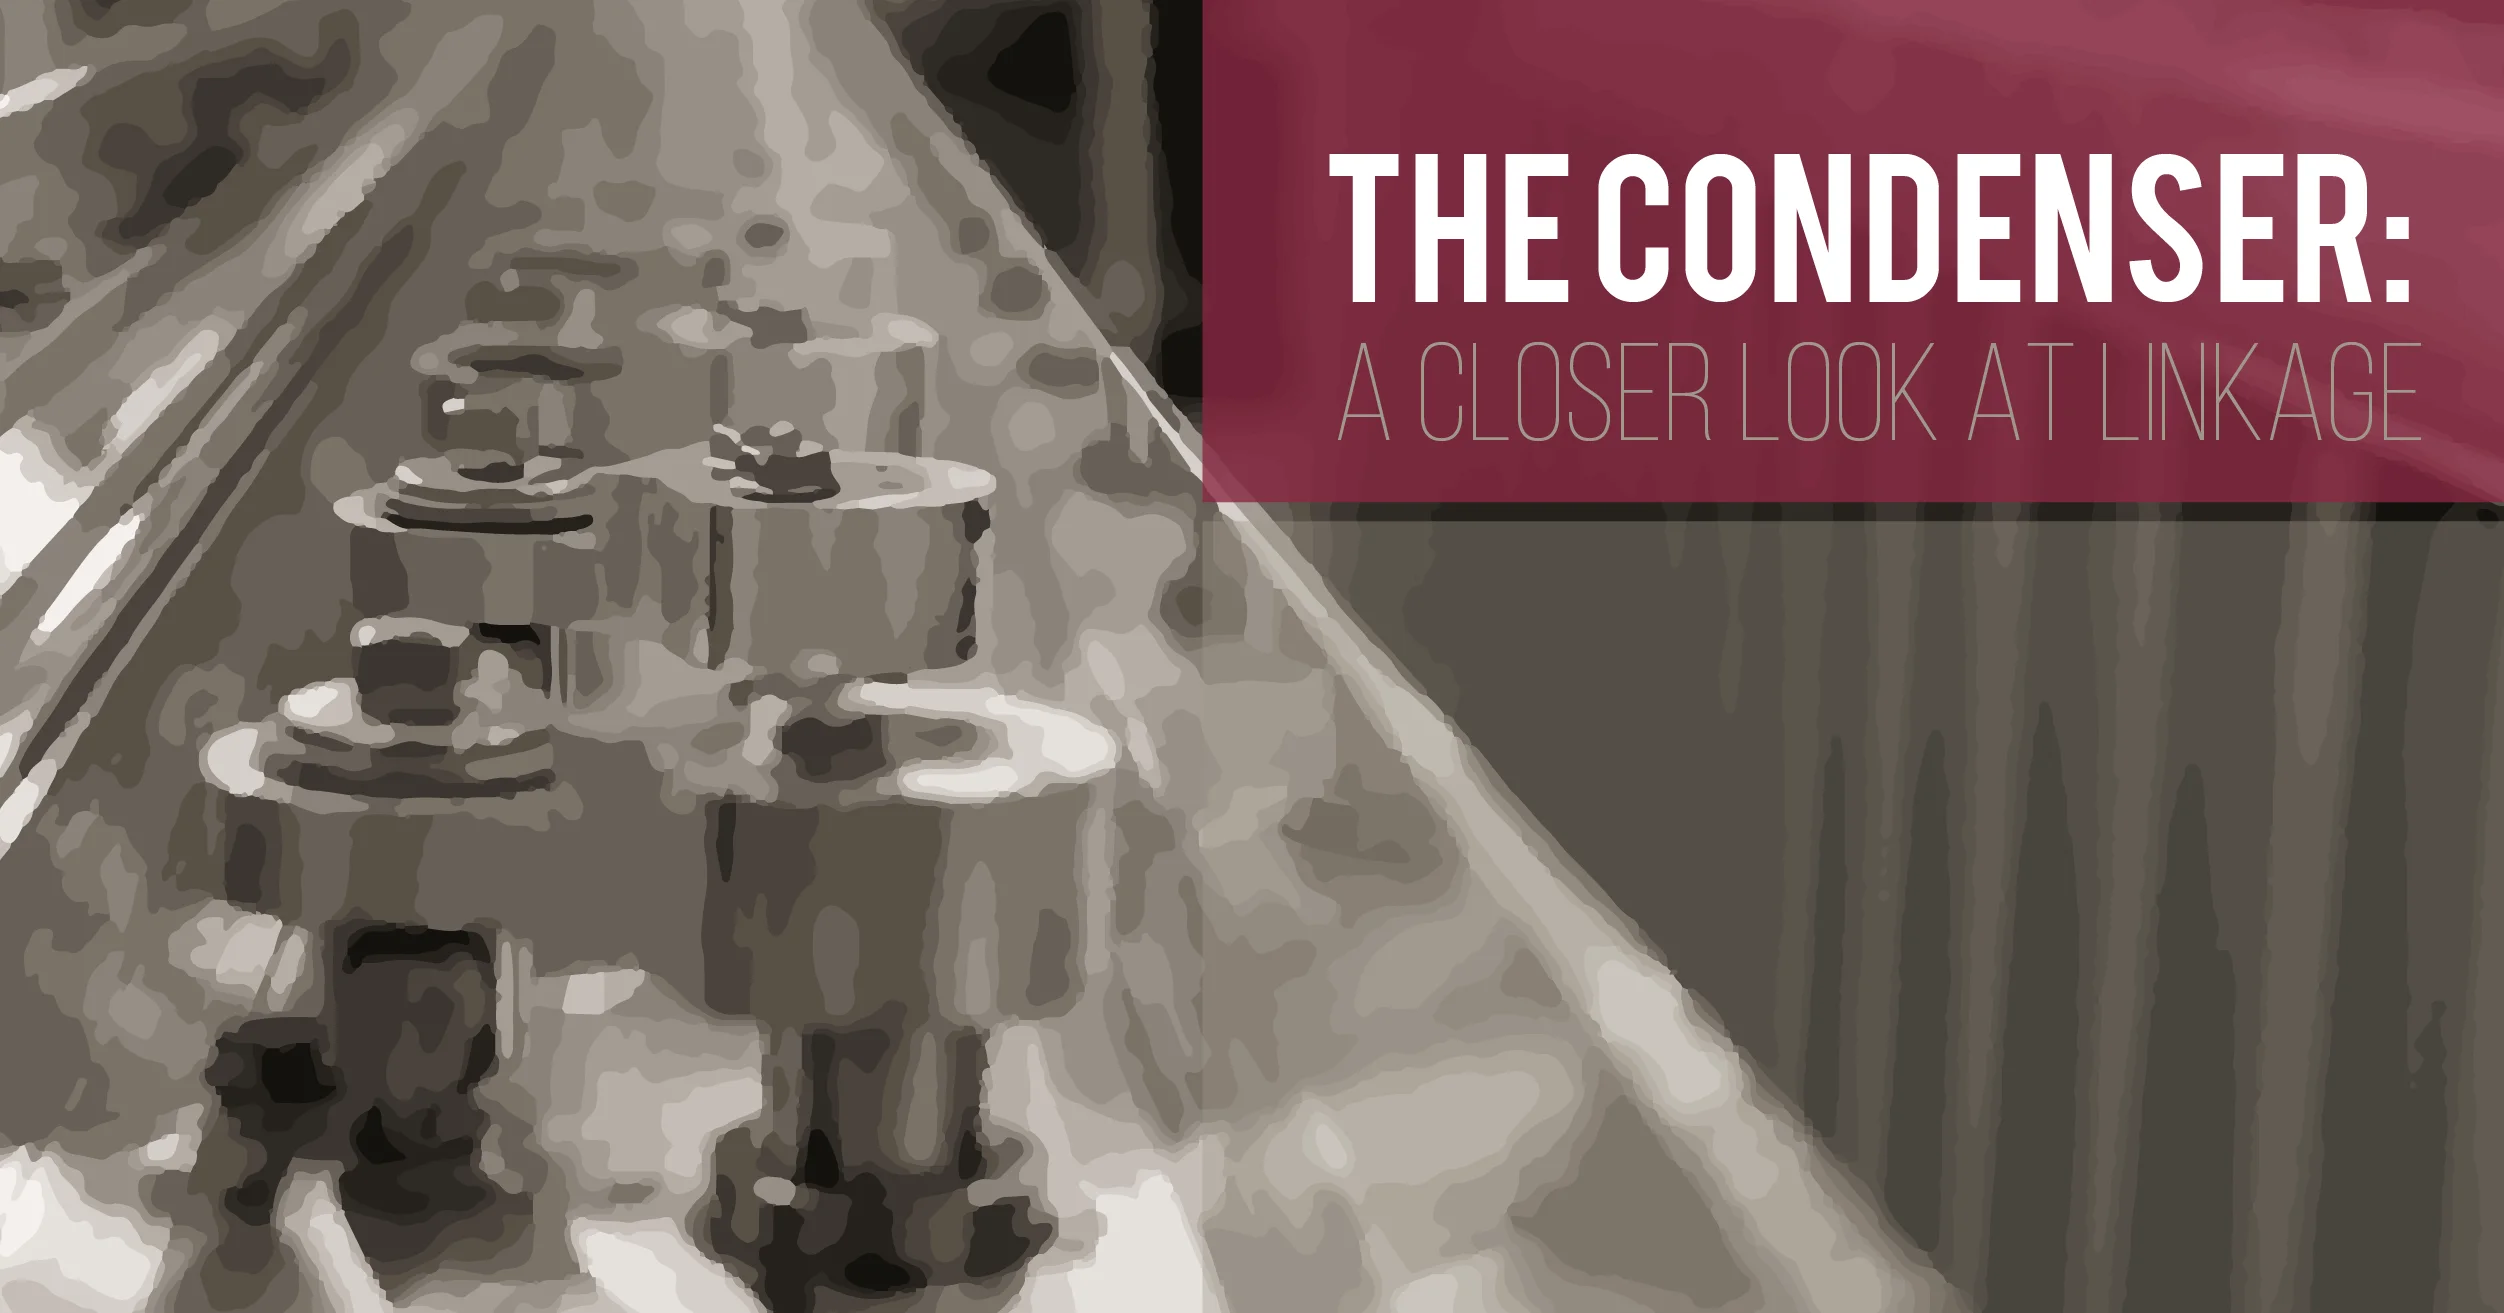 The Condenser - A Closer Look at Linkage